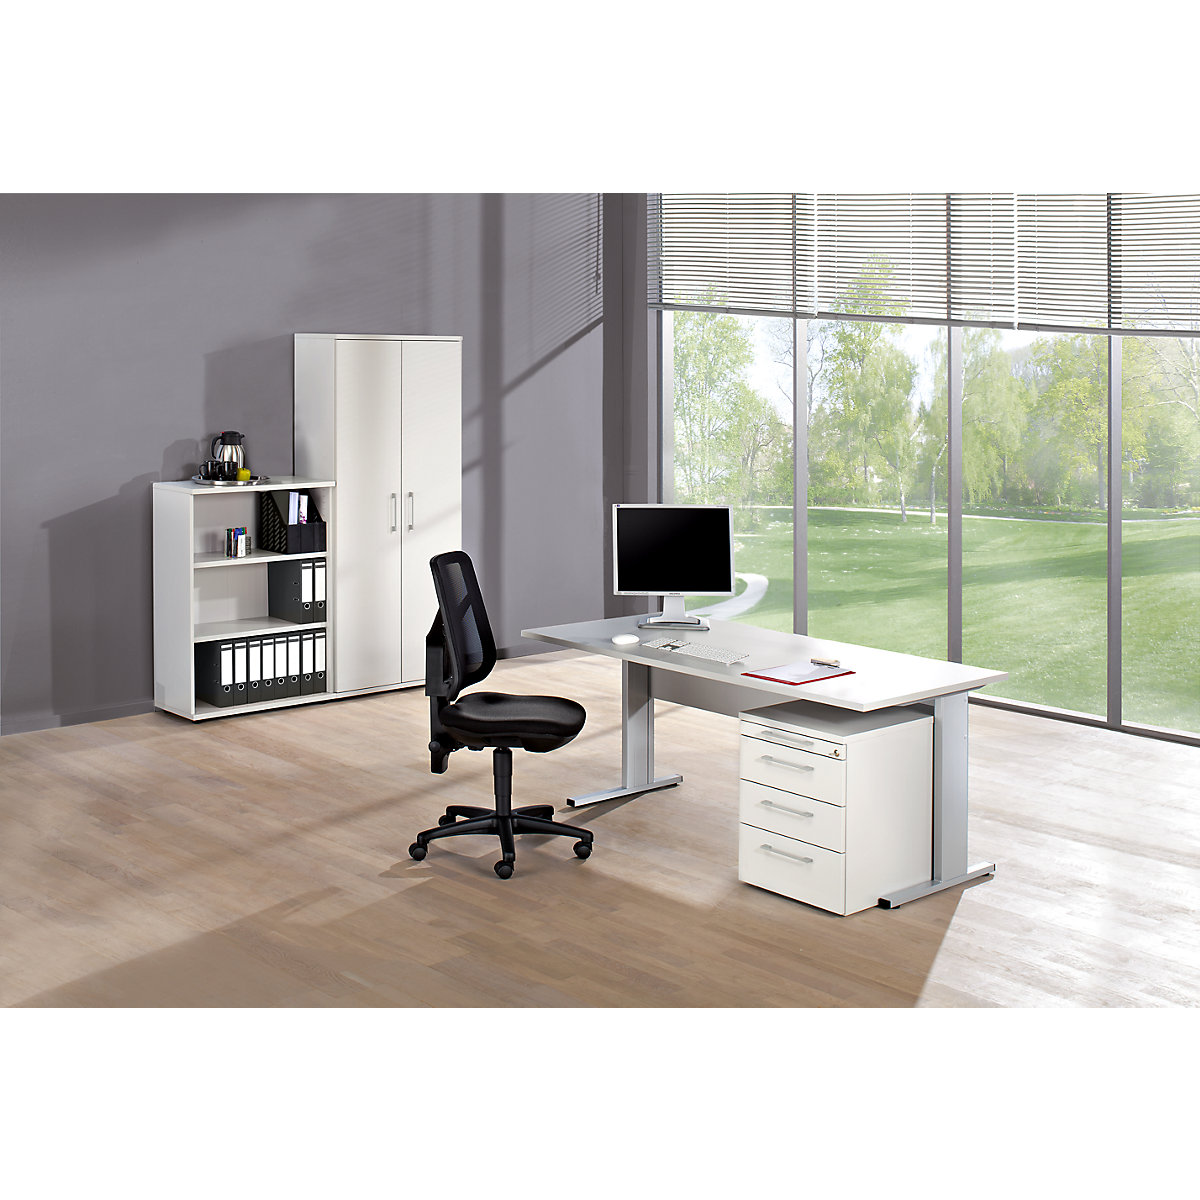 Office package PETRA, including office swivel chair, light grey-3